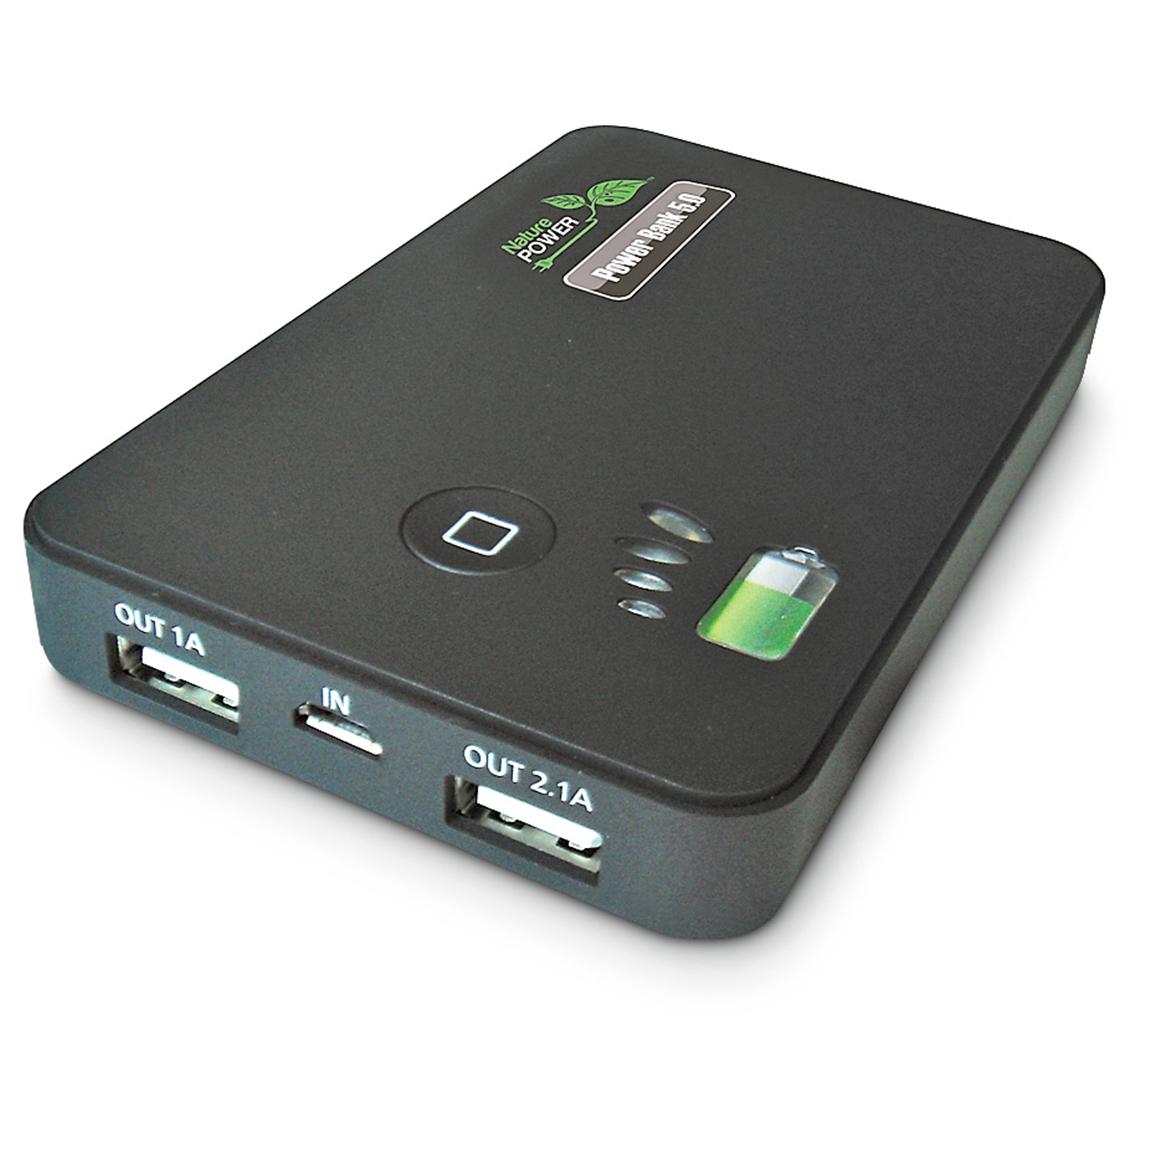 Nature Power Power Bank 5.0 Dual USB Charger